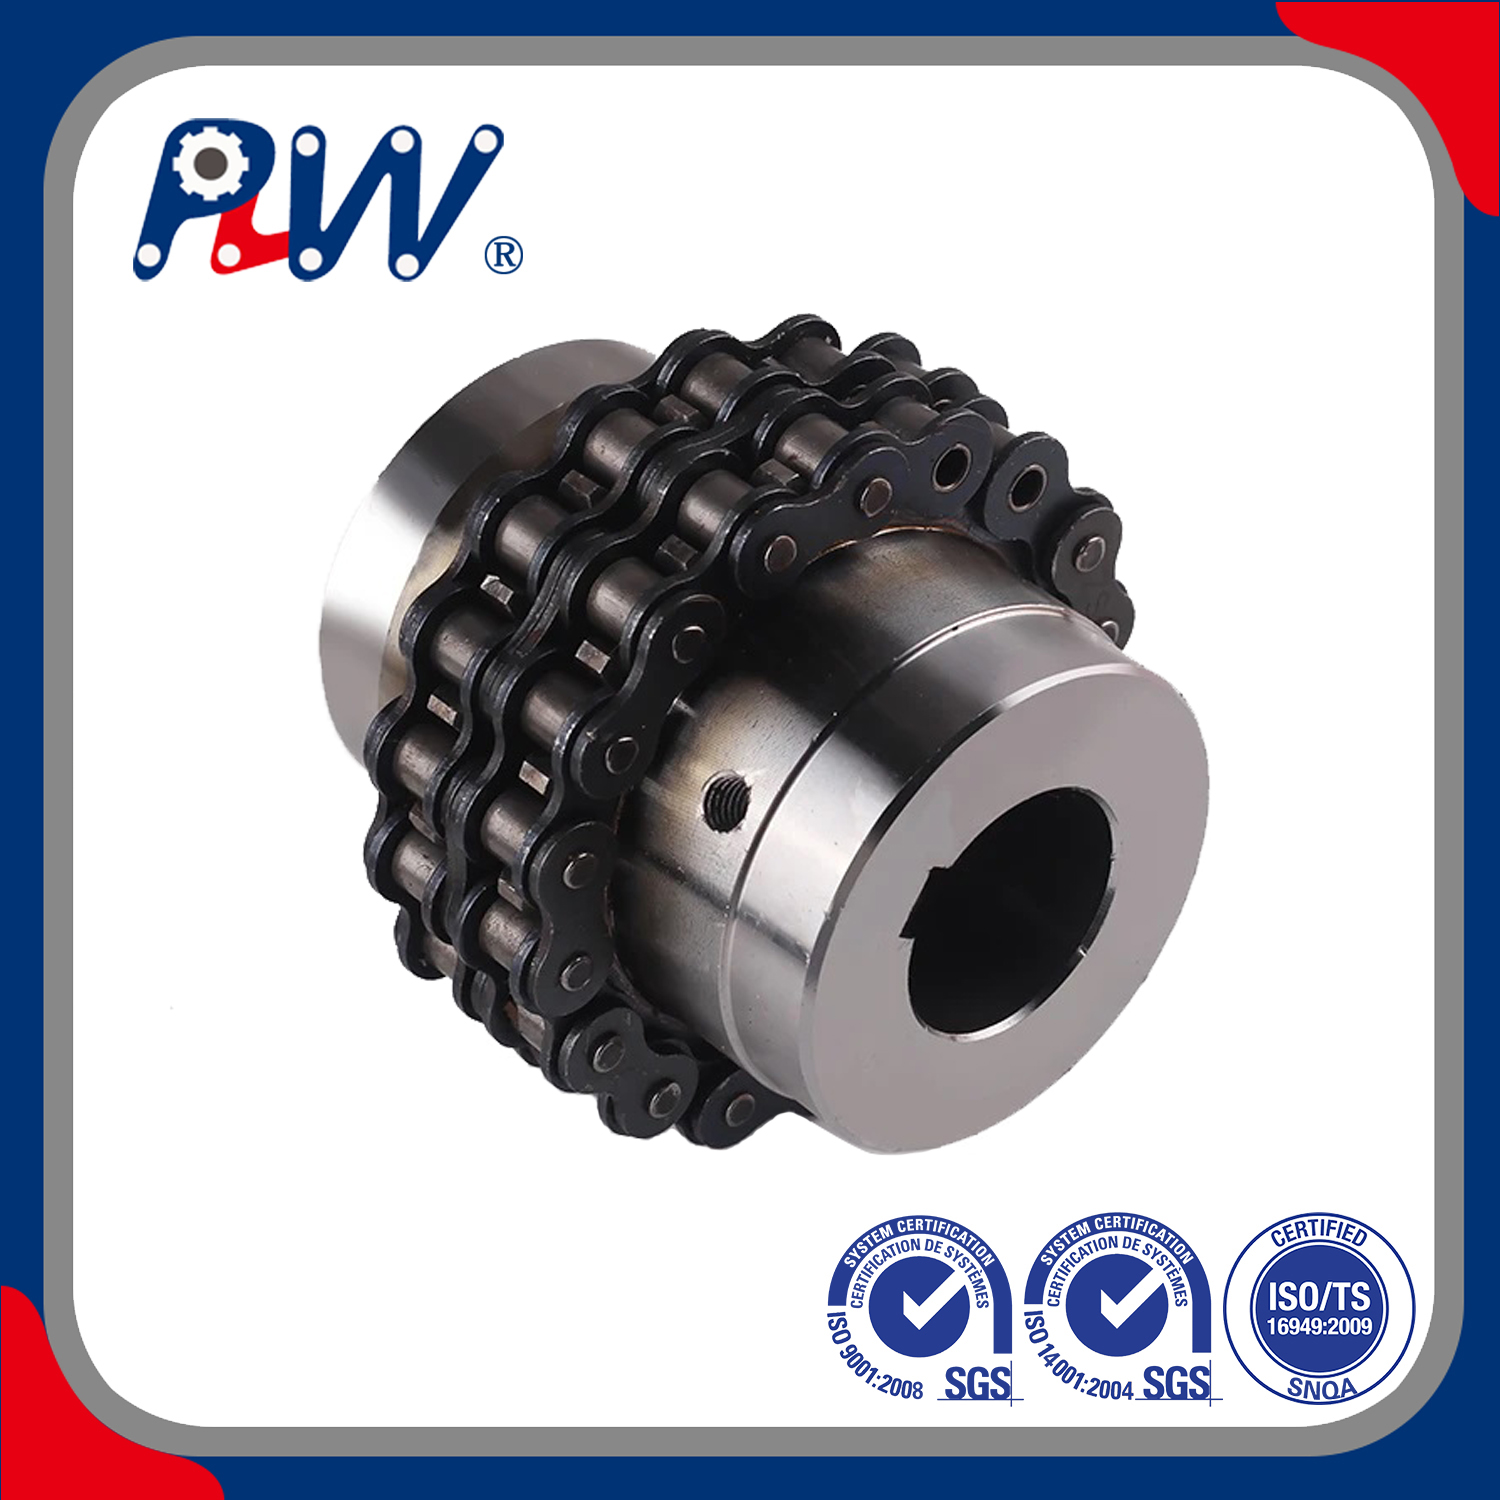 Assembly Chain Coupling From China (C-5016, C-5018)